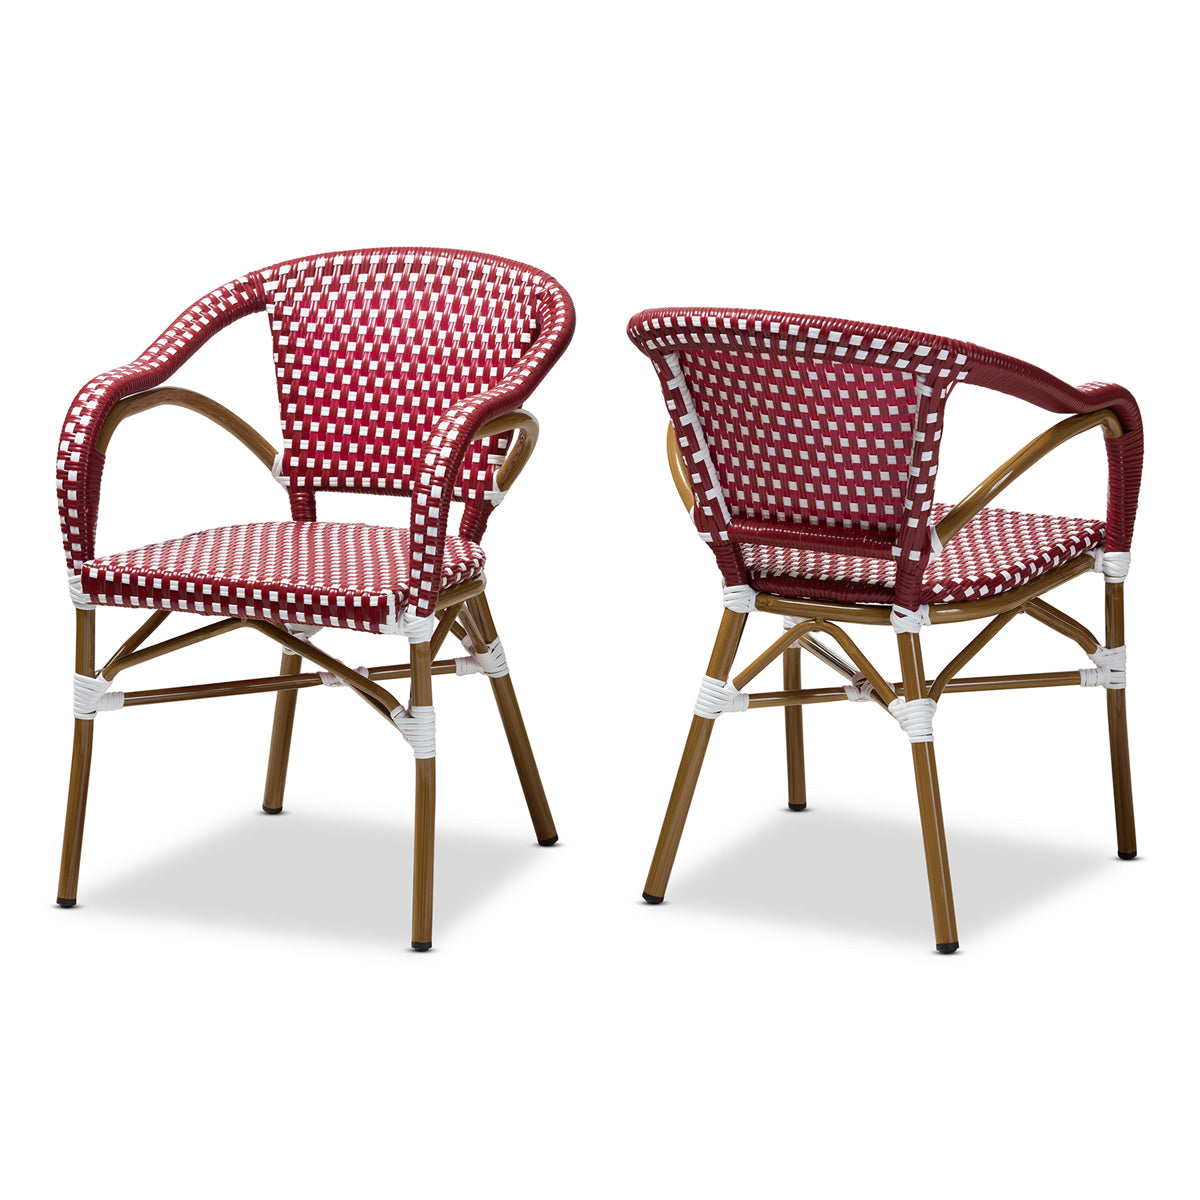 Baxton Studio Eliane Classic French Indoor and Outdoor Red and White Bamboo Style Stackable Bistro Dining Chair Set of 2 Baxton Studio-dining chair-Minimal And Modern - 1